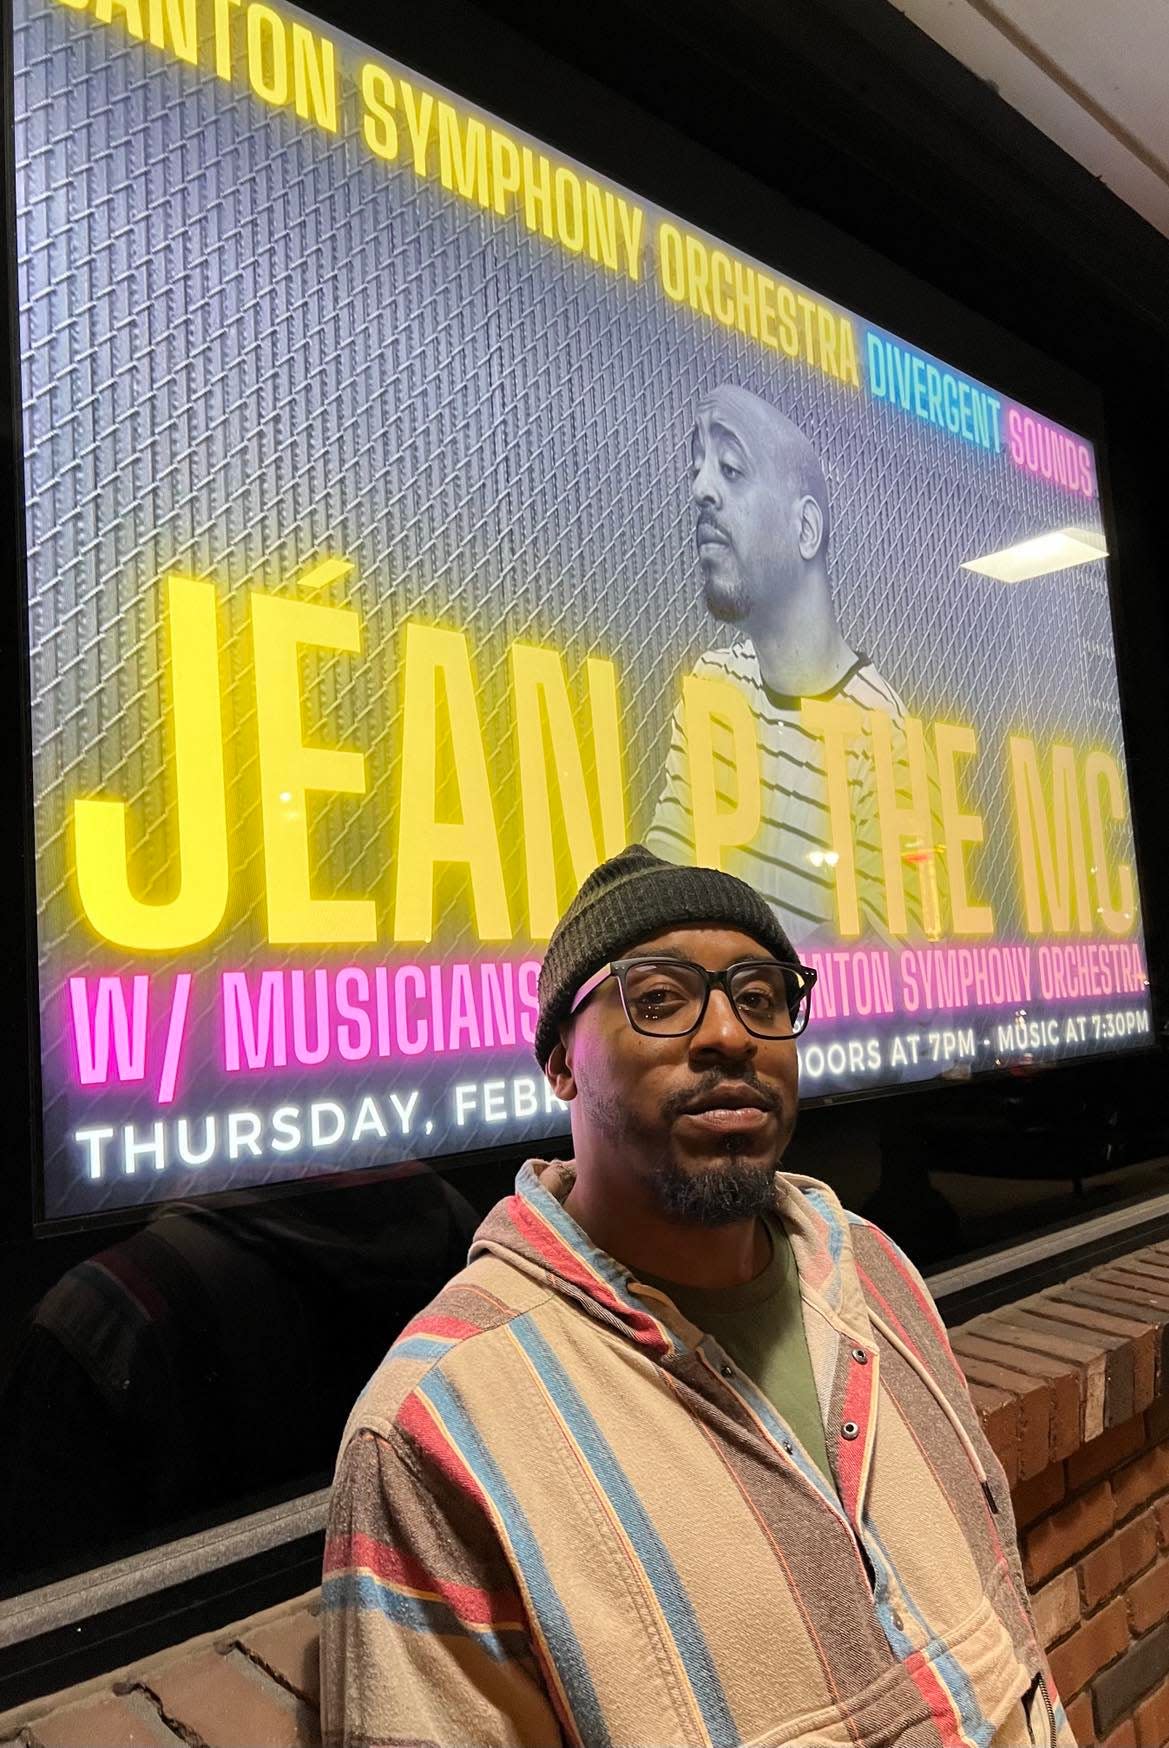 Canton-based rapper and hip-hop artist Jéan P the MC will be performing with the Canton Symphony Orchestra on Thursday at The Auricle in downtown Canton. Tickets cost $20 in advance and $25 day of the show.